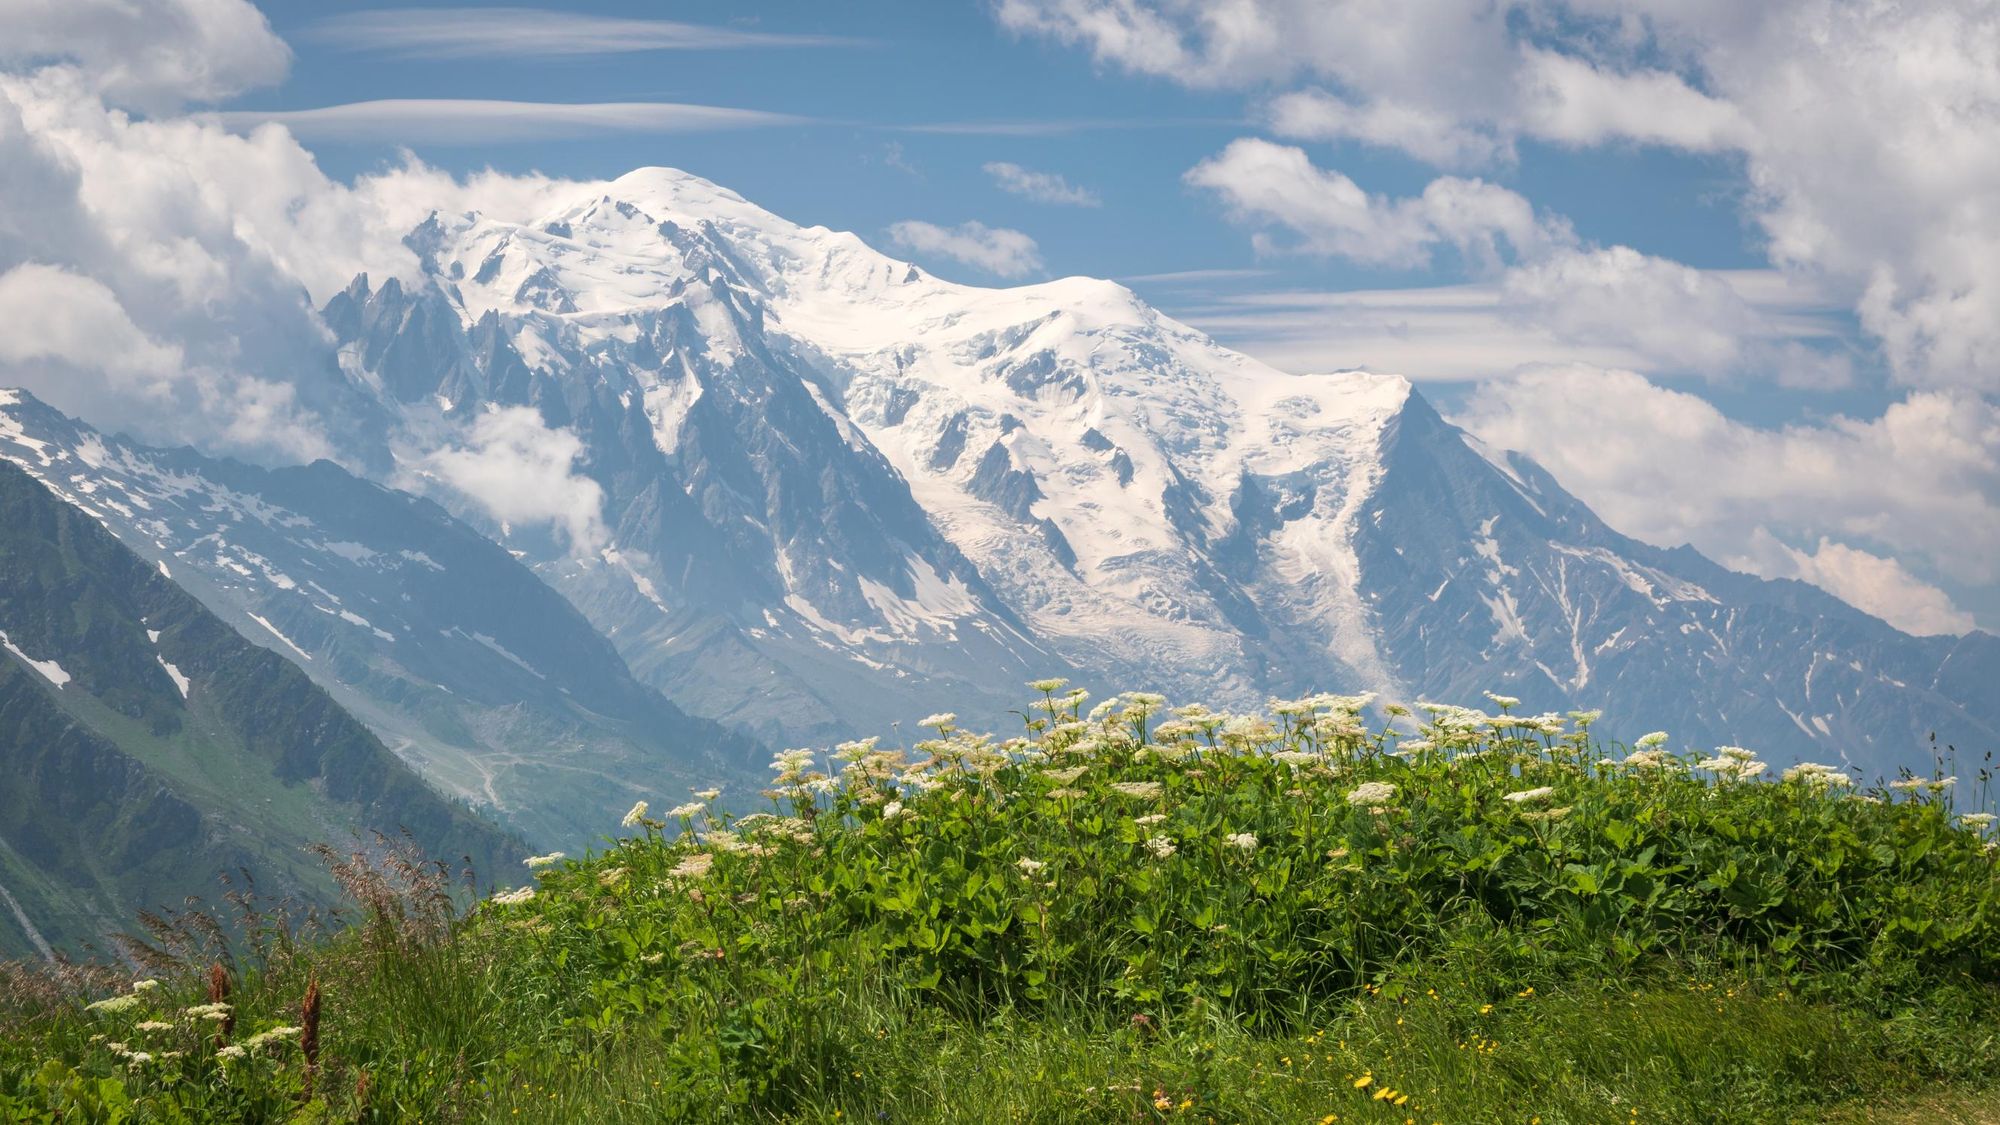 The summit of Mont Blanc as seen from Col de Balme. Photo: Getty.